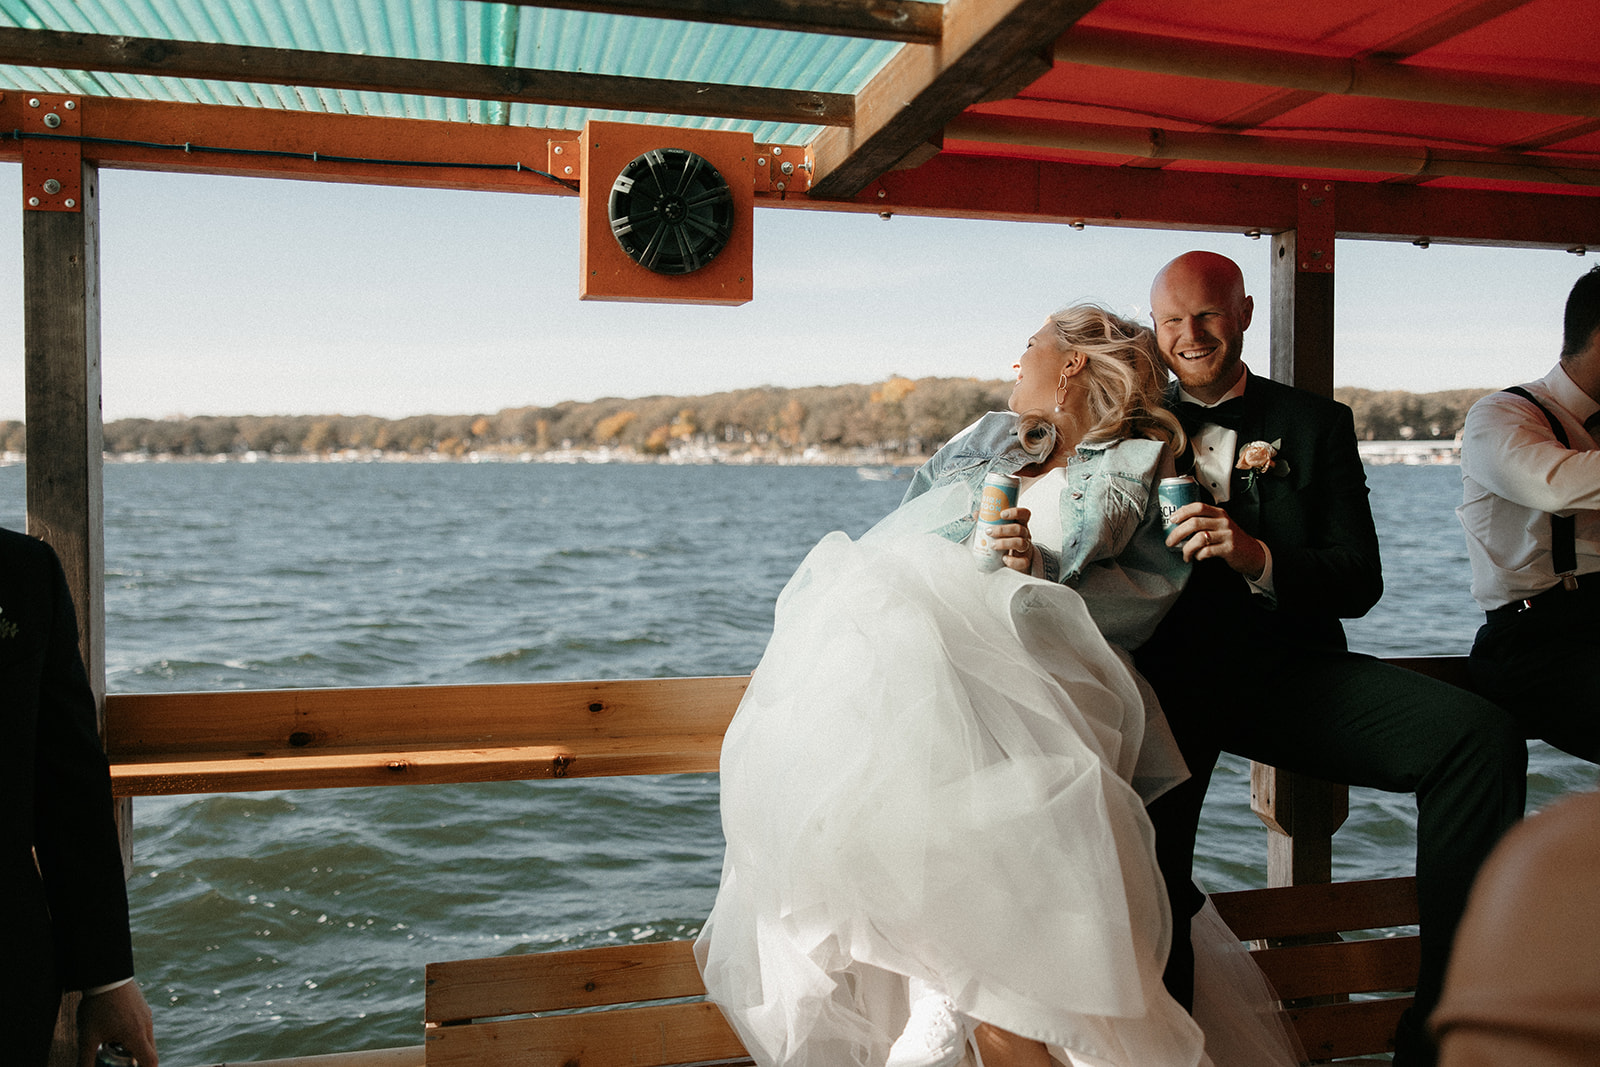 A bride and groom share time on a party boat in Okoboji, Iowa.